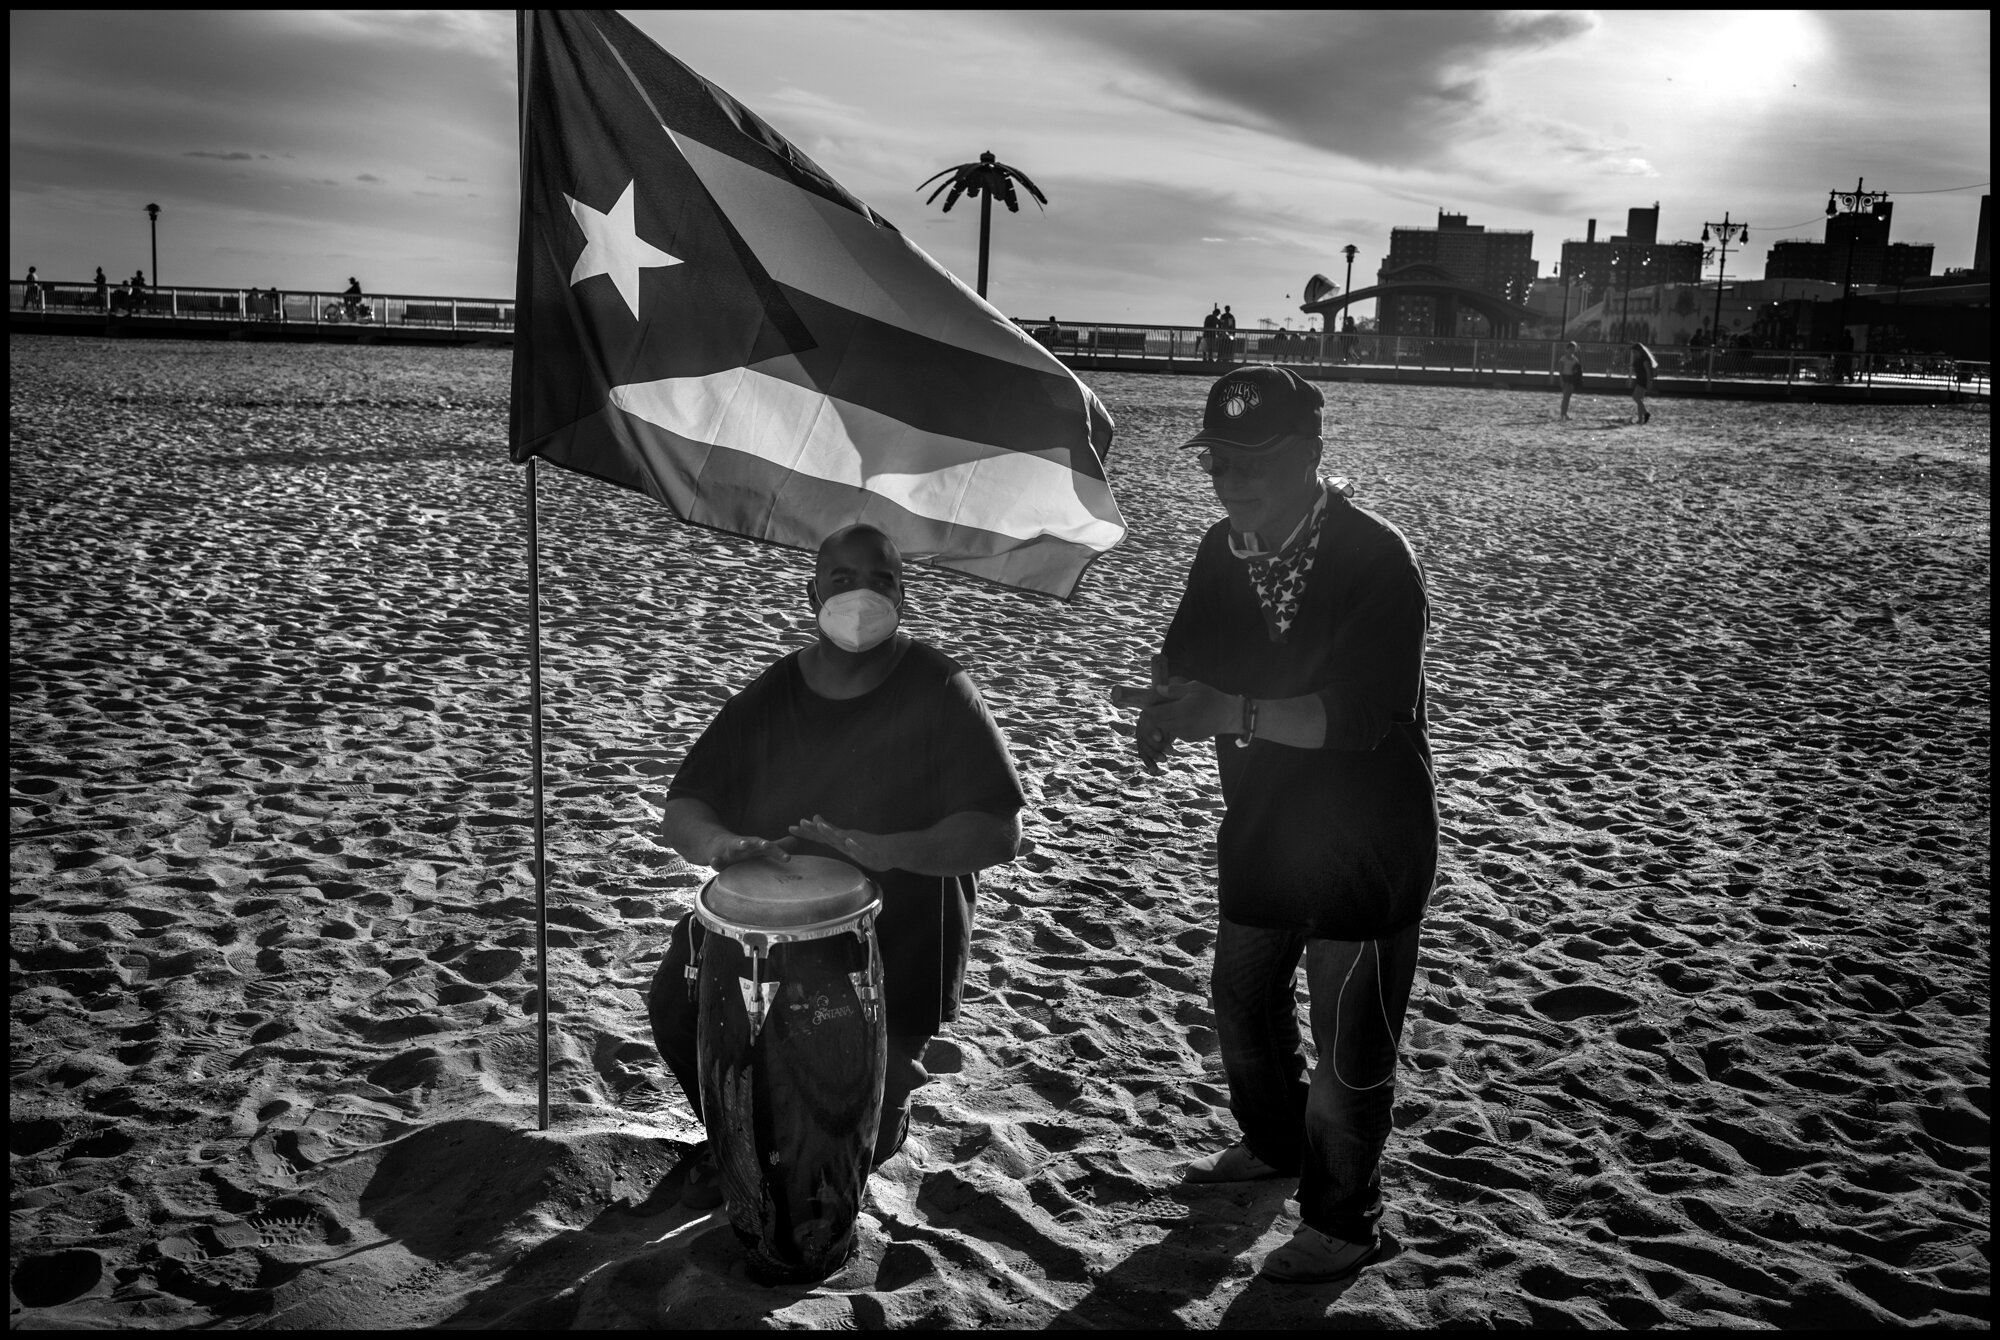  “Bear”, wearing a mask, plays music with a friend, on a gorgeous spring day at Coney Island.   May 16, 2020. © Peter Turnley.   ID# 49-003 